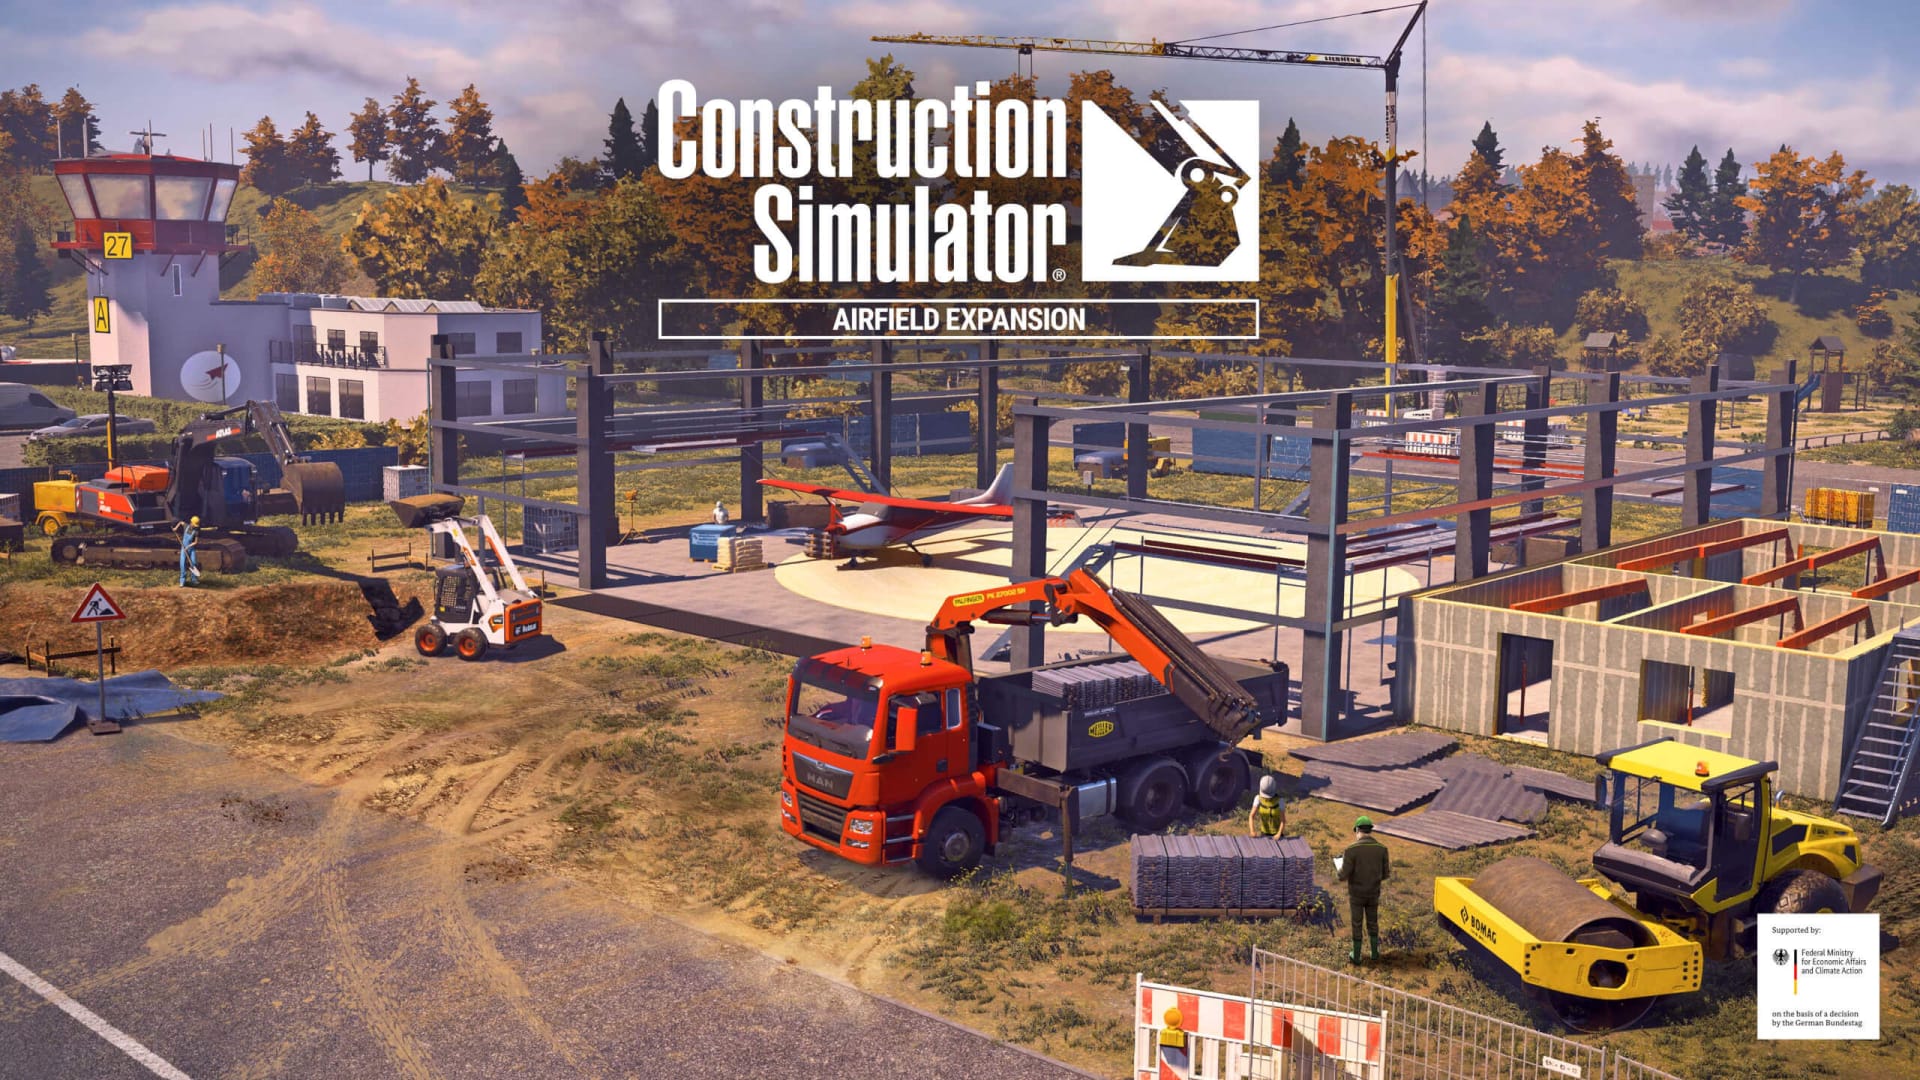 Construction Simulator Airfield Expansion Takes Flight Later This Month